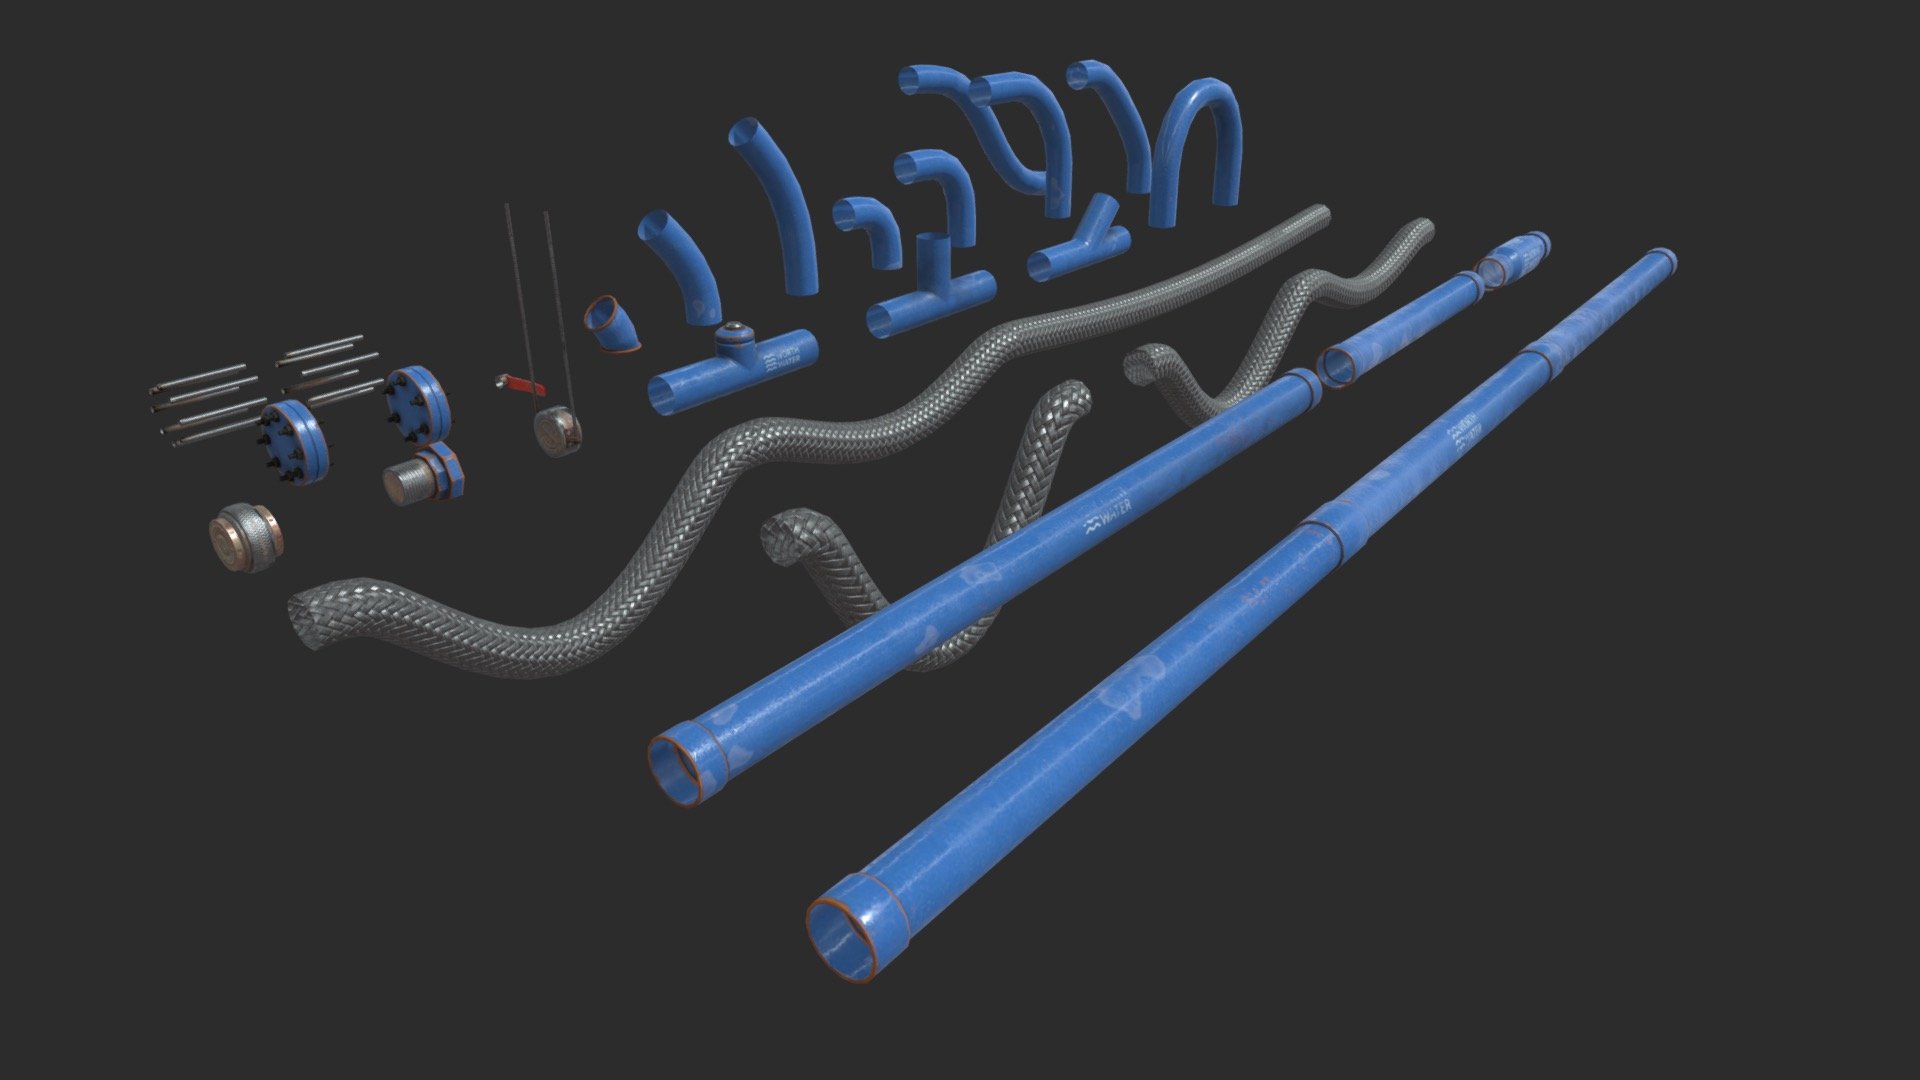 This modular pipes asset pack including 27 individual set Ø10 pipes with 4 LODs and colliders to get a good optimization. All elements can easily be positioned together by moving in 10cm increments. Also, this pack includes 37 pre-assembled sets to allow you to speed up your assemblies. 



INDIVIDUAL SETS INCLUDE :




4 elbow 90°

3 elbow 45°

1 U pipe

1 S pipe

2 T pipes

1 Y pipe

4 straight pipes

3 flexible pipes

2 screw joints

1 mounting bracket

1 handle valve

2 end of pipes

2 threaded rod sets

SPECIFICATIONS




Objects : 64

Polygons : 4975

GAME SPECS




LODs : Yes (inside FBX for Unity &amp; Unreal)

Numbers of LODs : 4

Collider : Yes

Lightmap UV : No

EXPORTED FORMATS




FBX

Collada

OBJ

TEXTURES




Materials in scene : 1

Textures sizes : 4K

Textures types : Base Color, Metallic, Roughness, Normal (DirectX &amp; OpenGL), Heigh &amp; AO (also Unity &amp; Unreal workflow maps)

Textures format : TGA &amp; PNG
 - Modular Pipes - Water Treatment - Buy Royalty Free 3D model by KangaroOz 3D (@KangaroOz-3D) 3d model